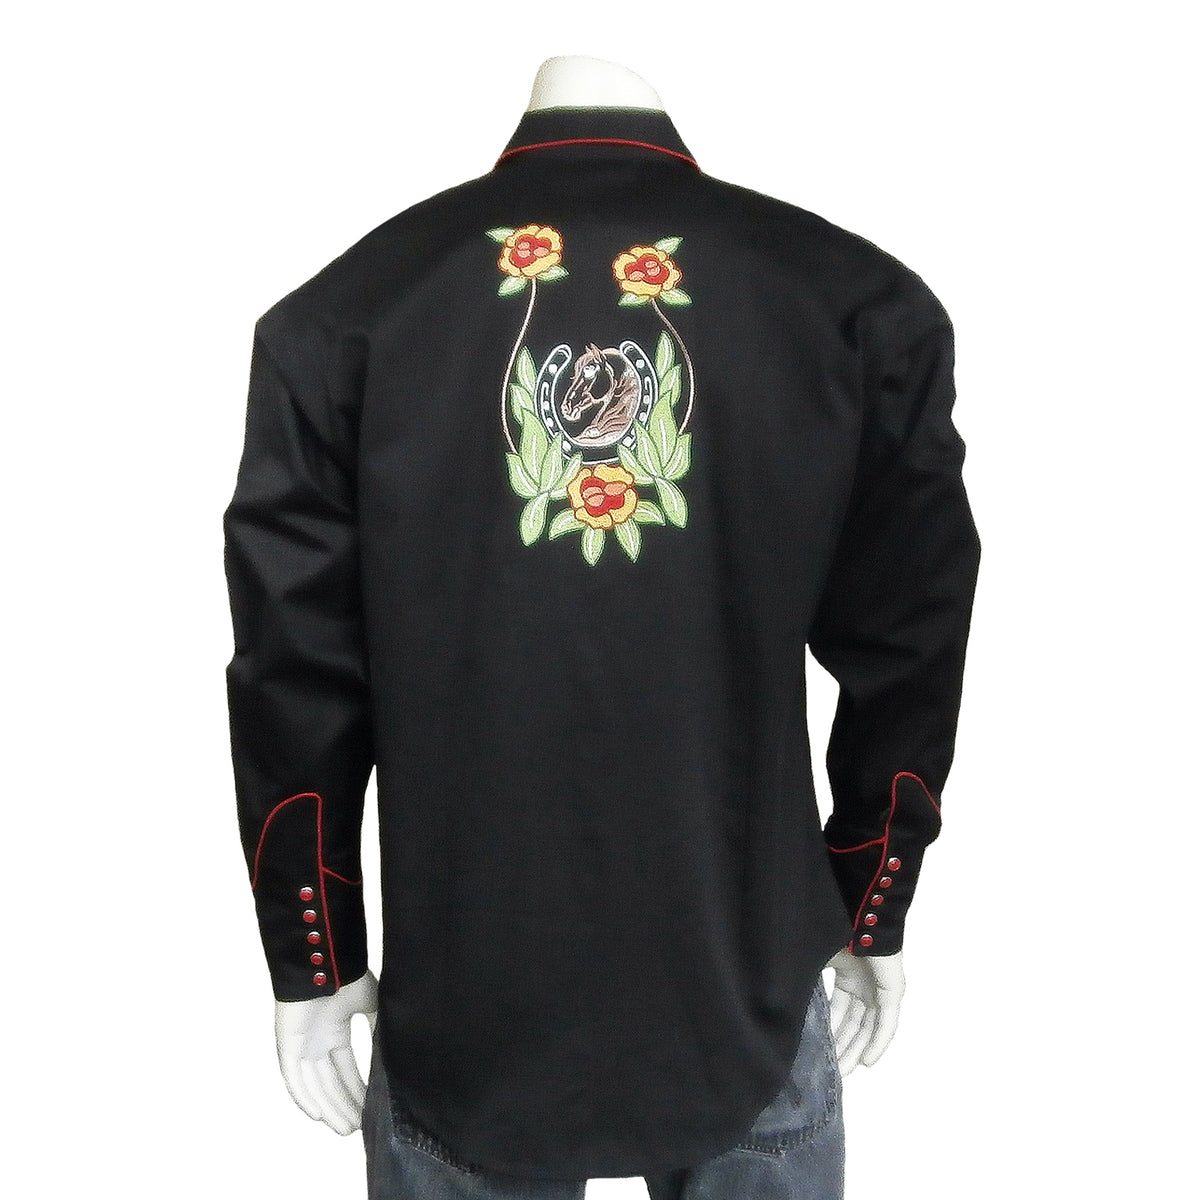 Men's Vintage Horsehead & Floral Embroidered Western Shirt in Black